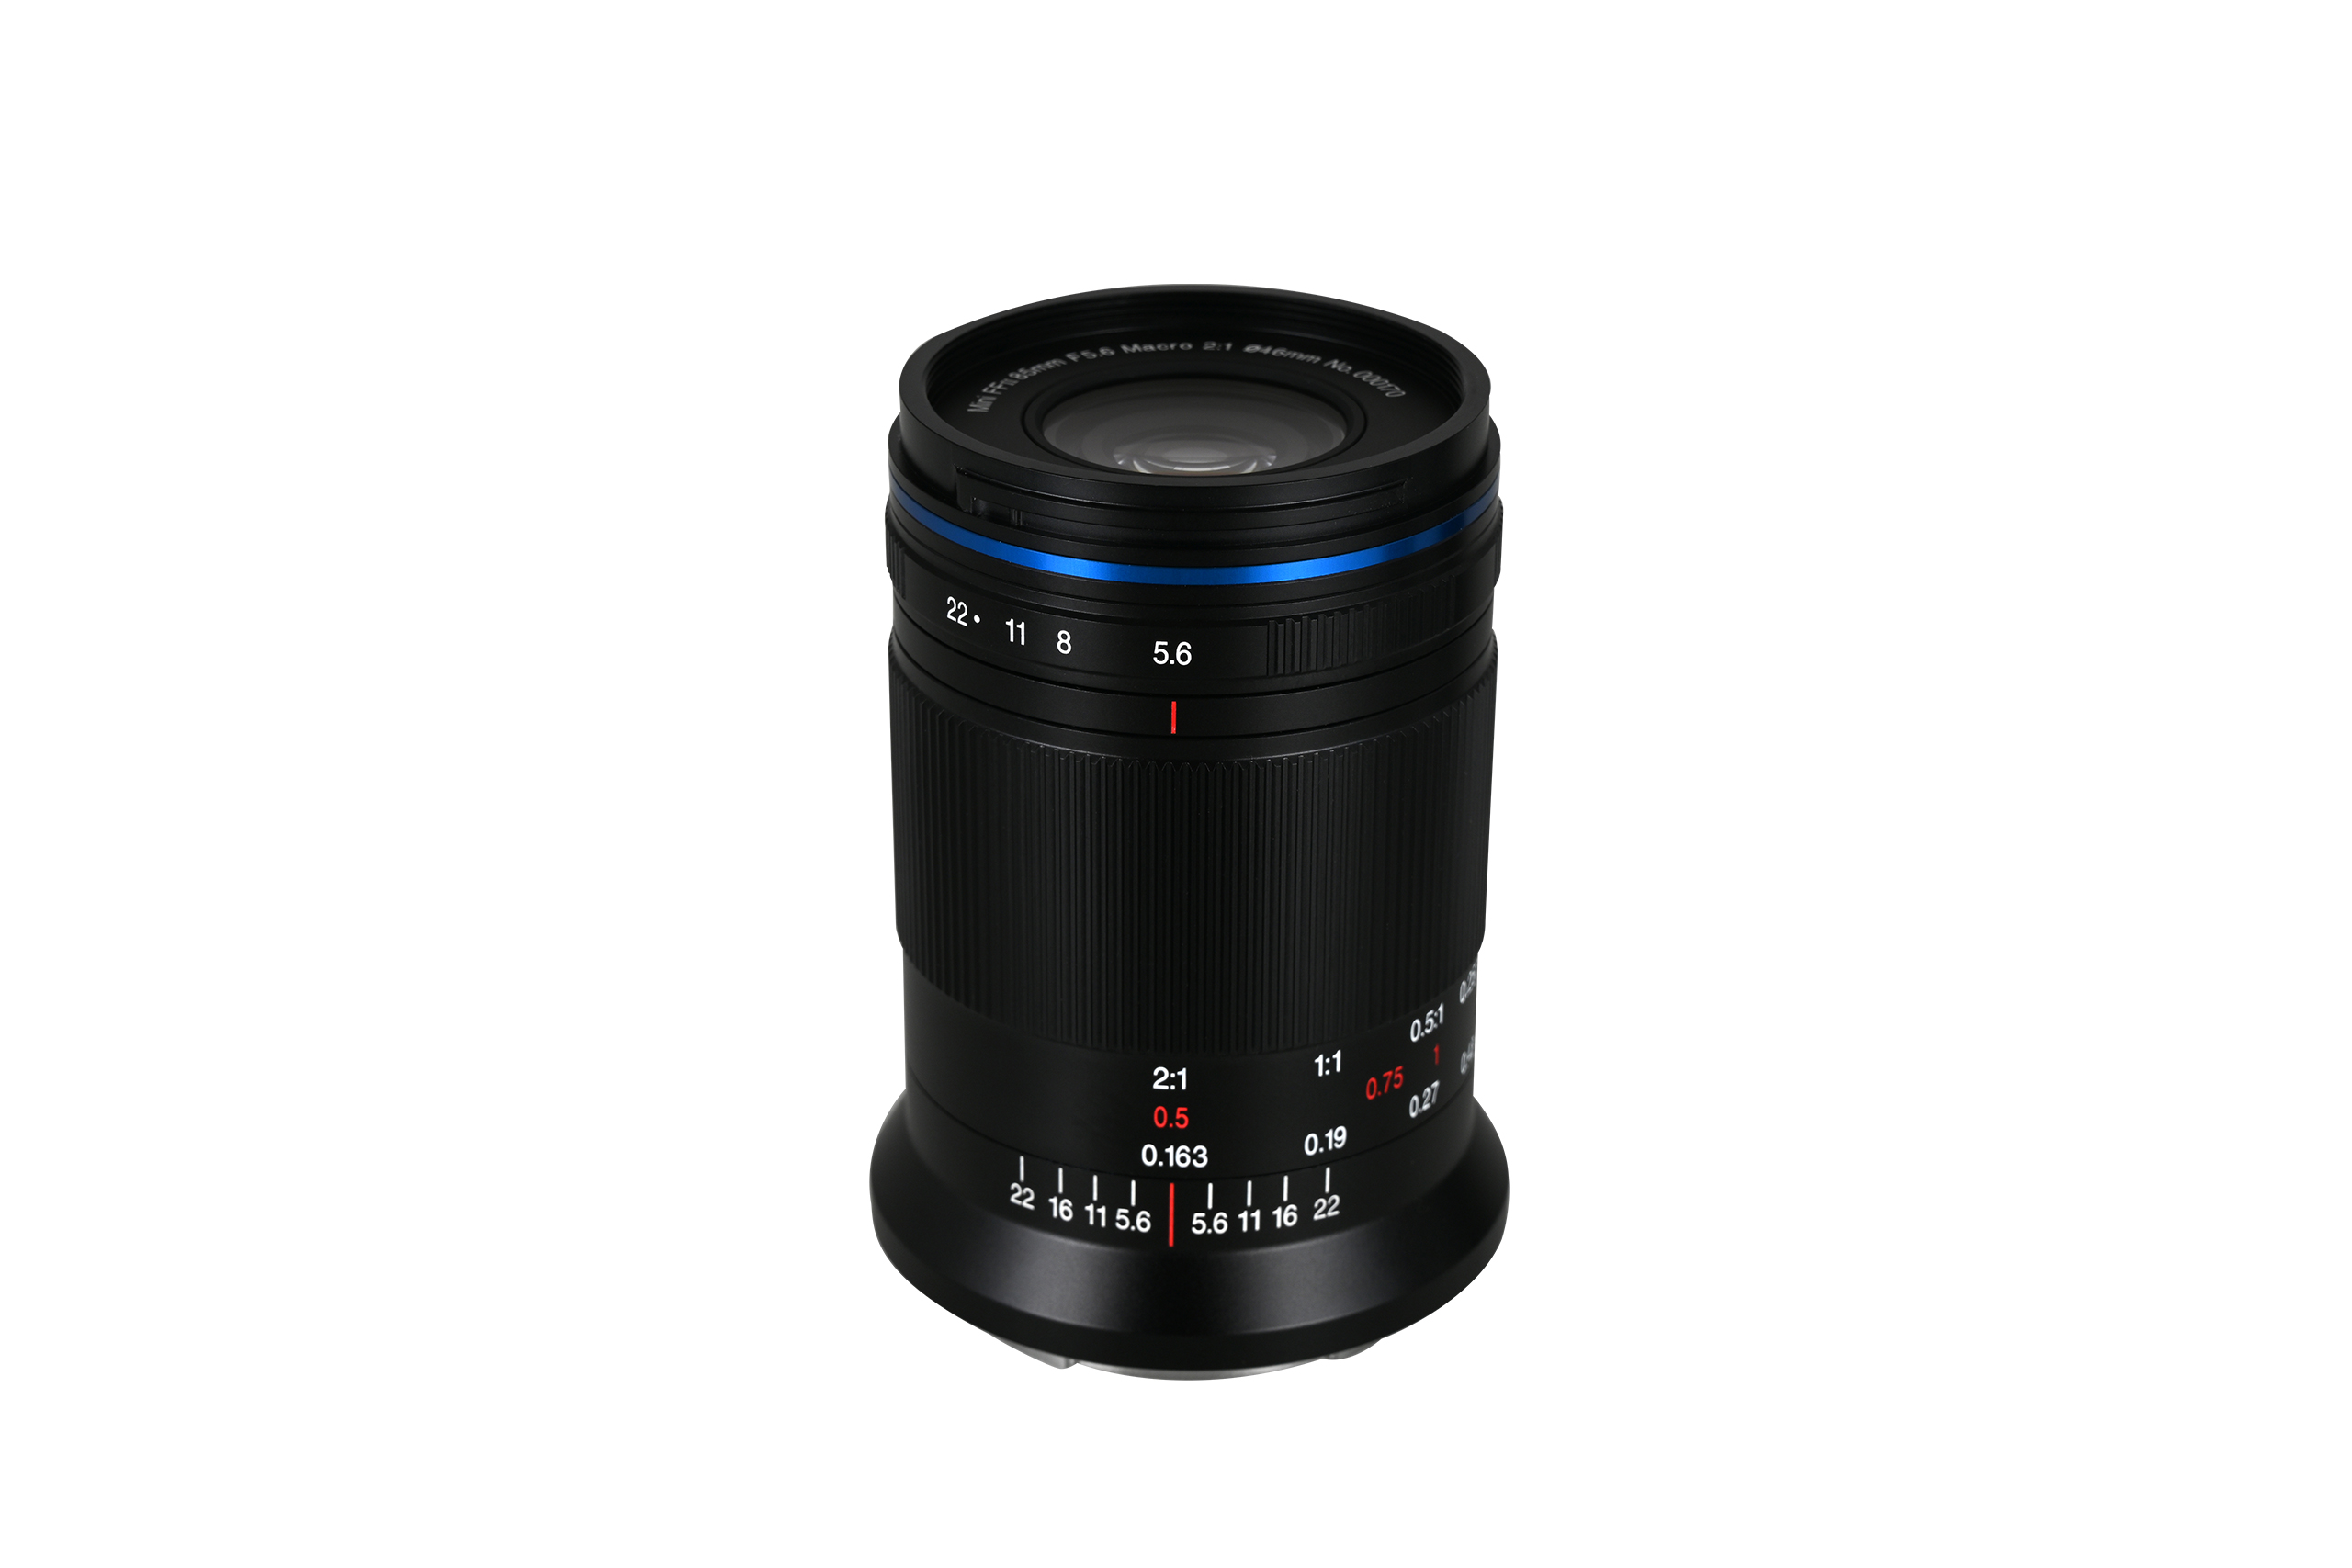 The Laowa 85mm F5.6 Is the L Mount’s Lightest Macro